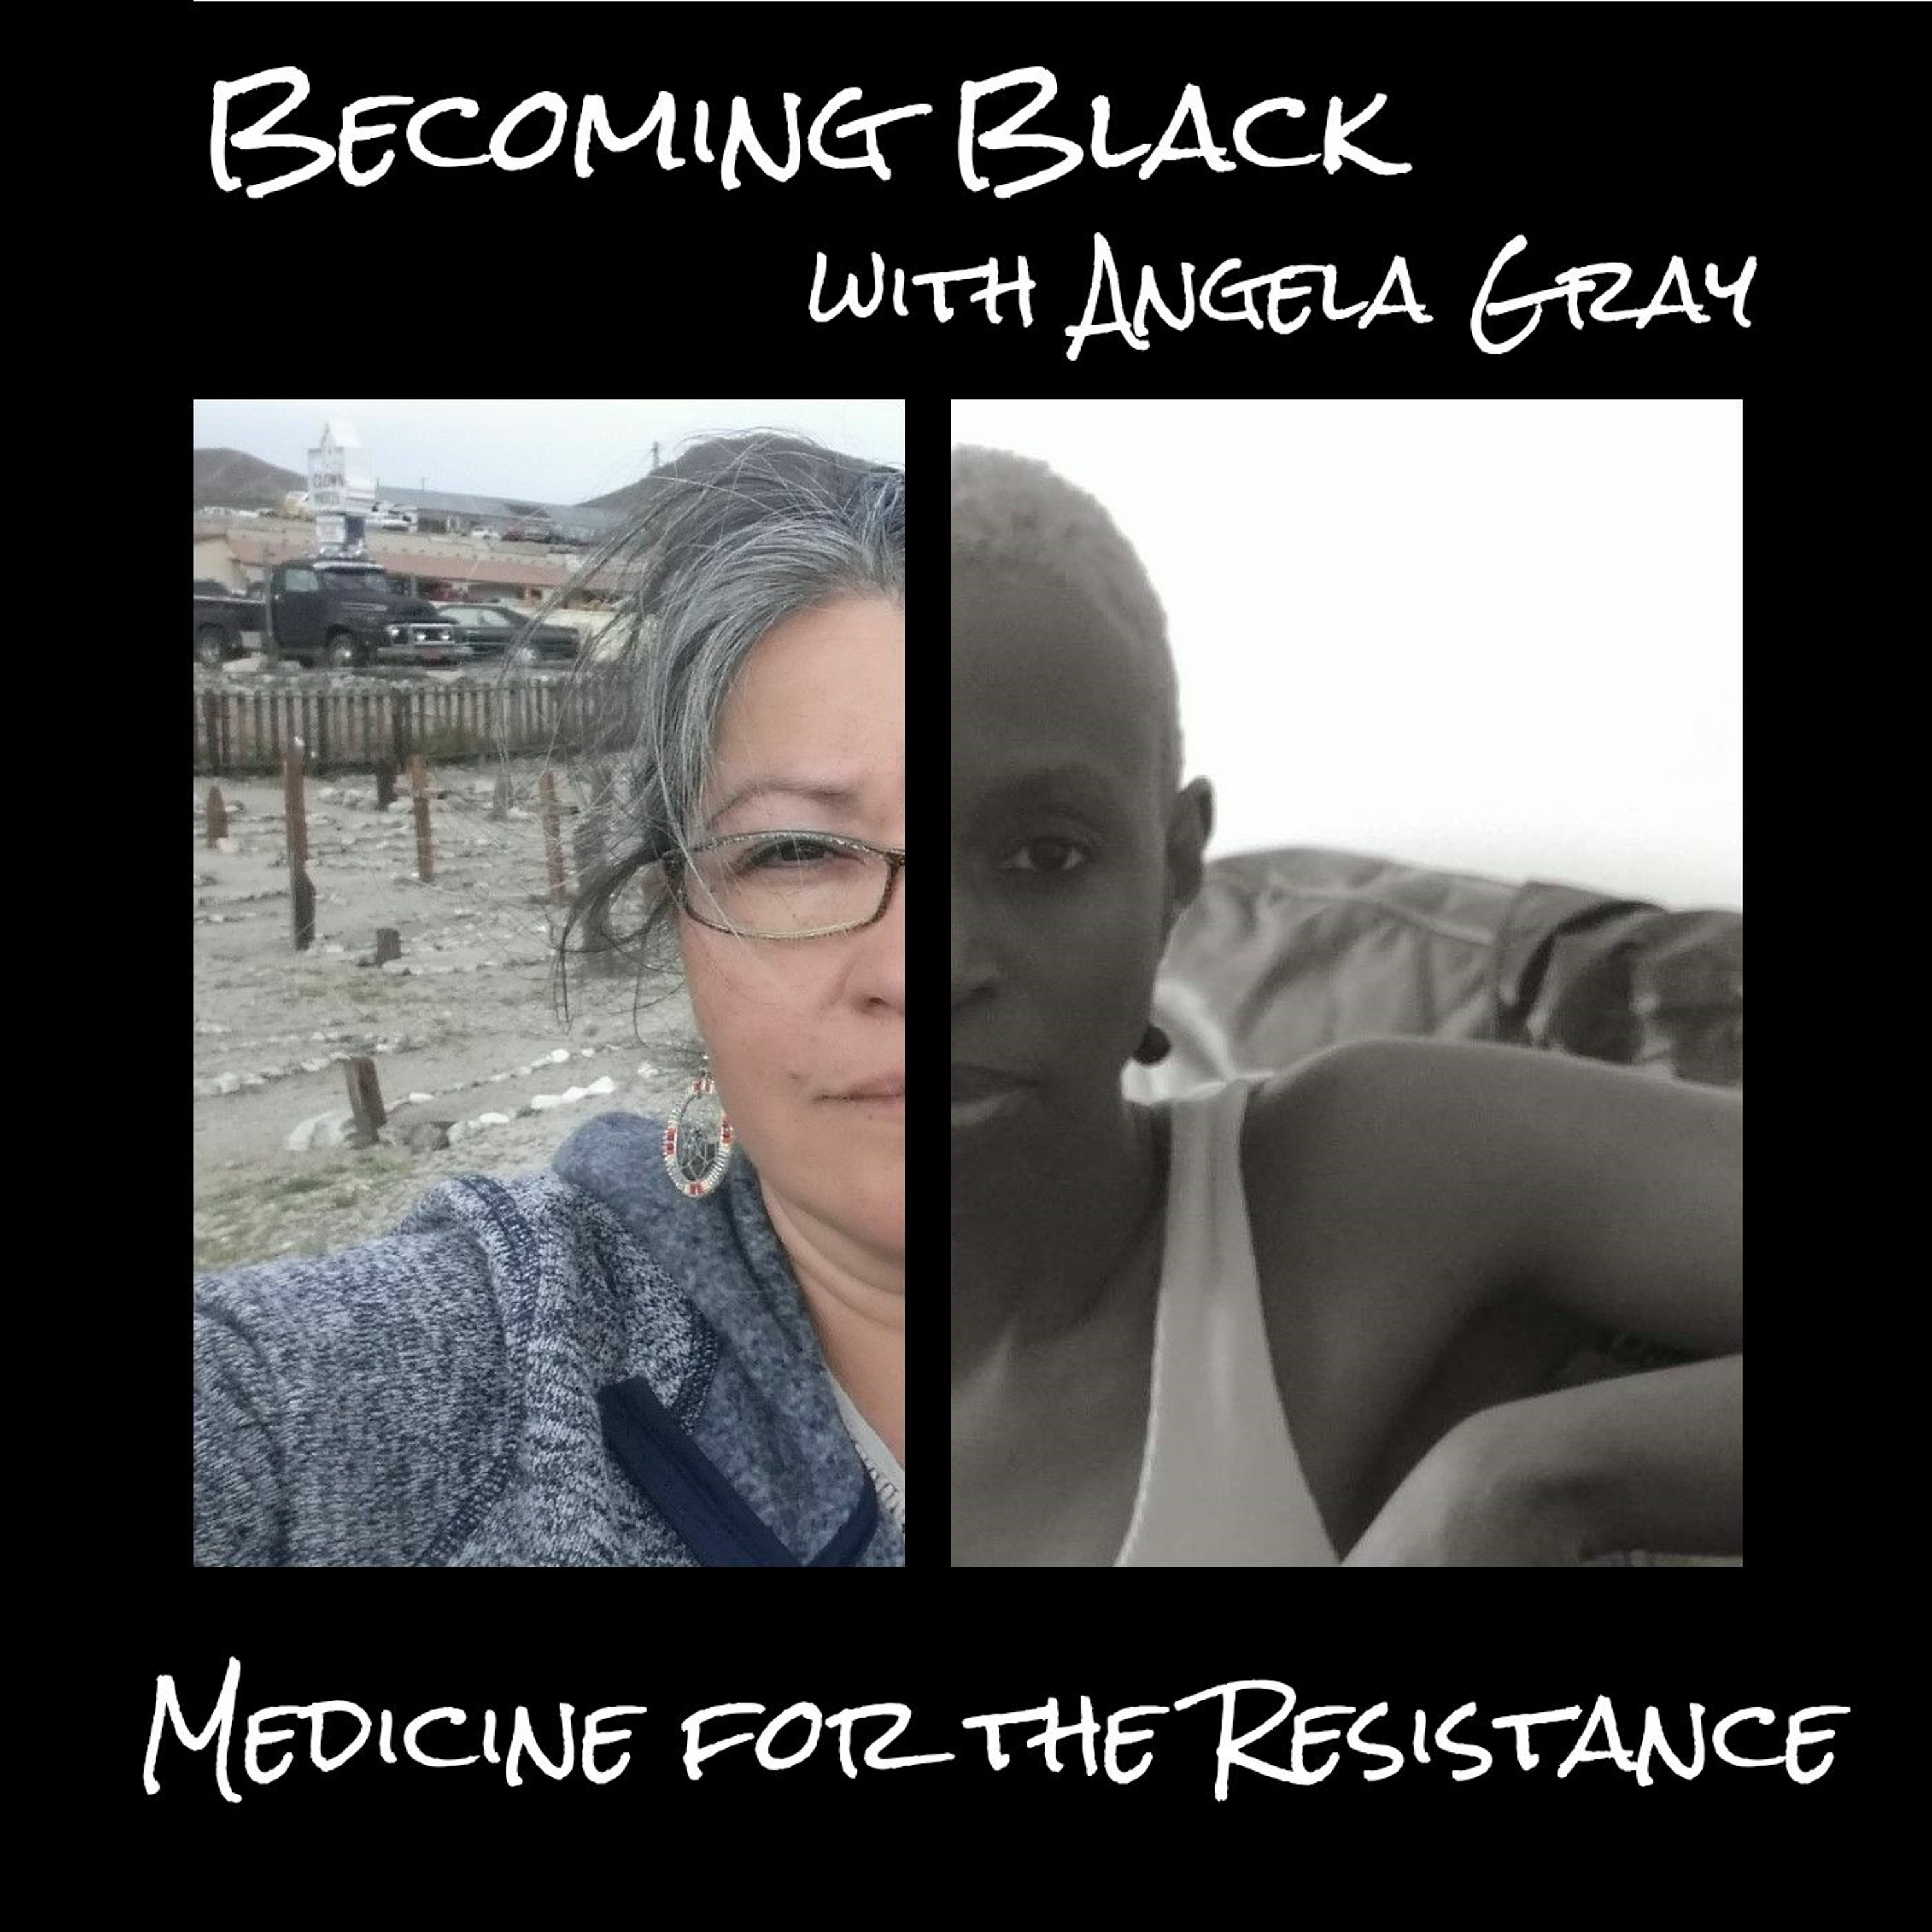 Becoming Black with Angela Gray